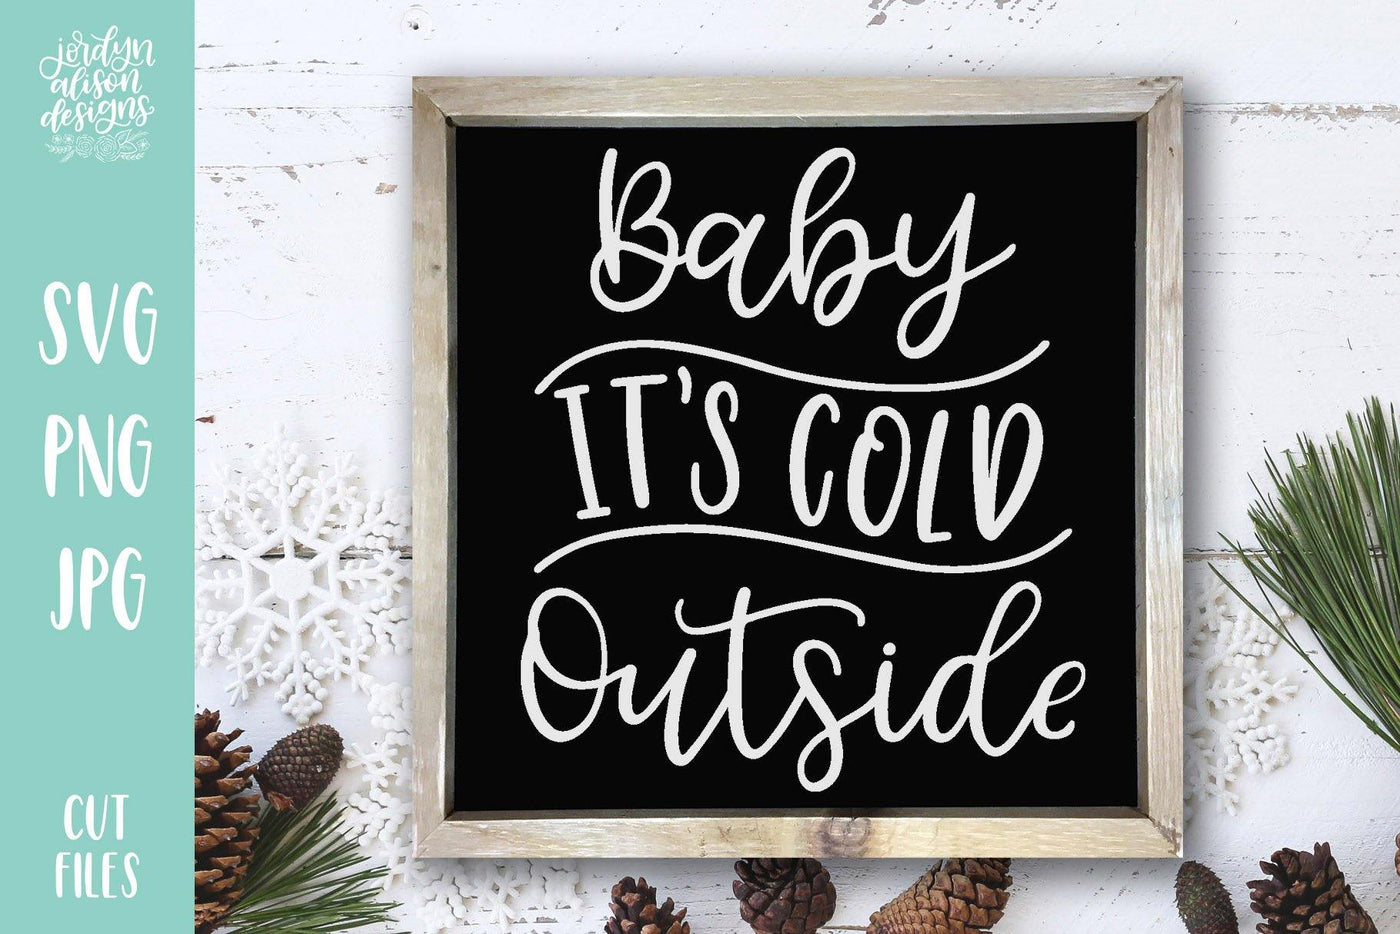 Square frame with handwritten text on chalkboard "Baby its Cold Outside"